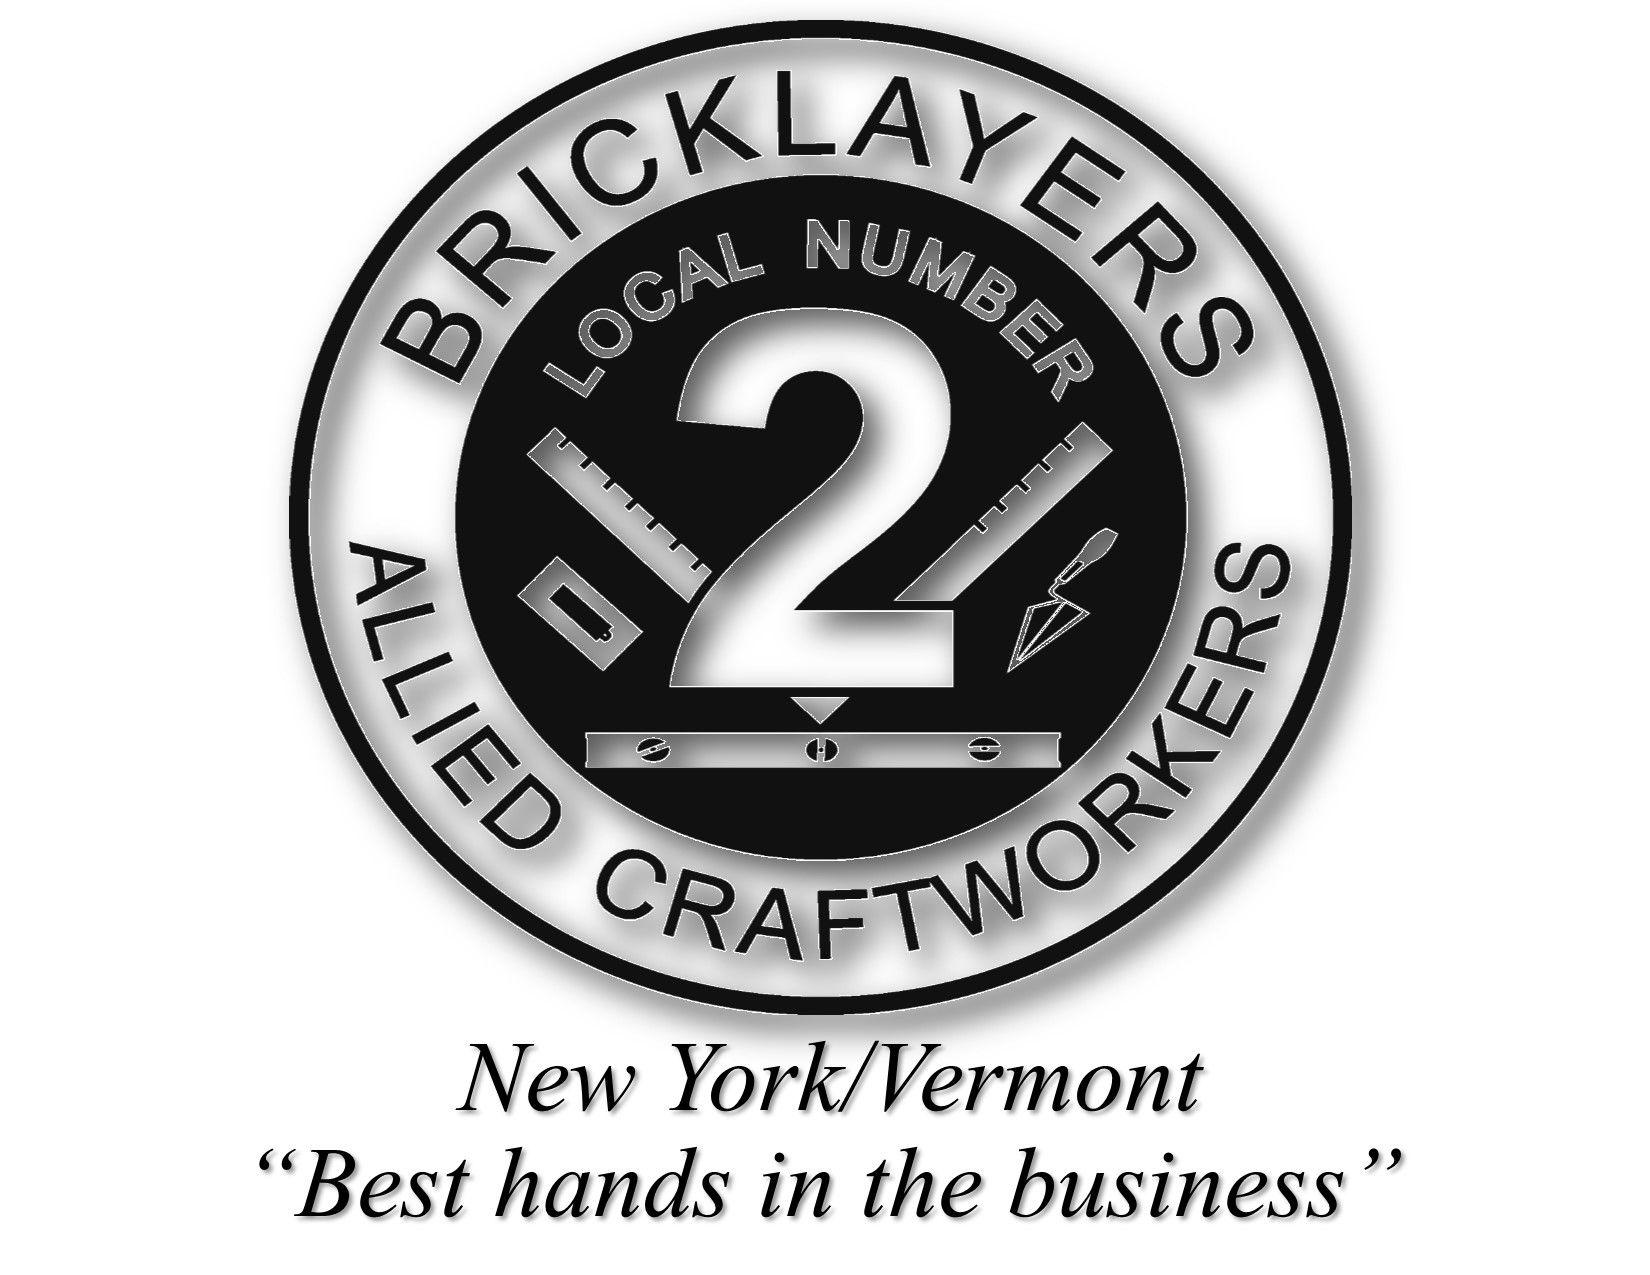 Vt-2 Logo - Bricklayers Allied Craftworkers Local 2 NY/VT: About us 2